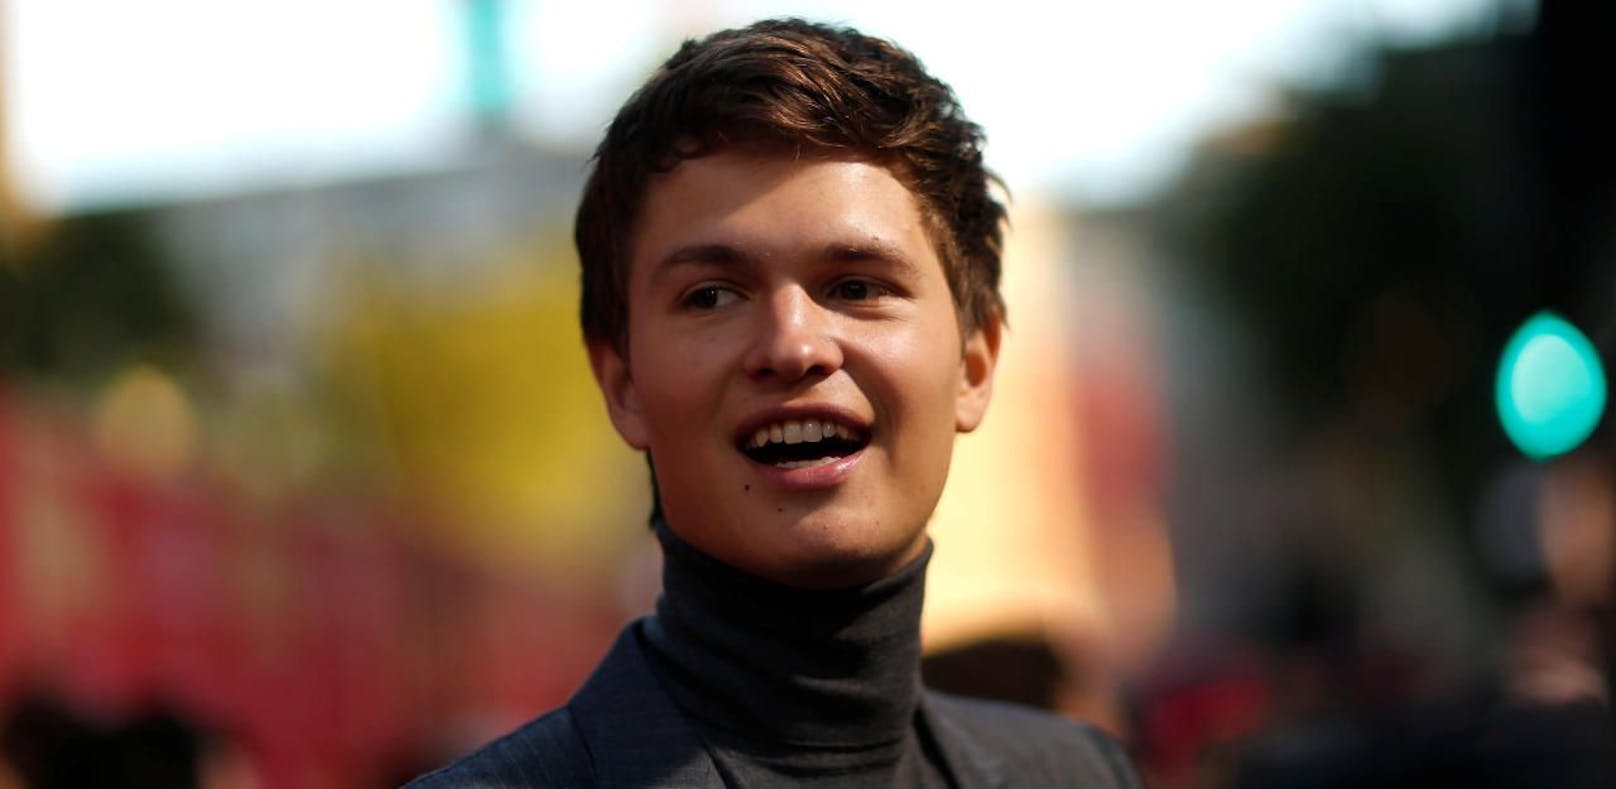 Ansel Elgort will kein "Hollywood-Idiot" sein